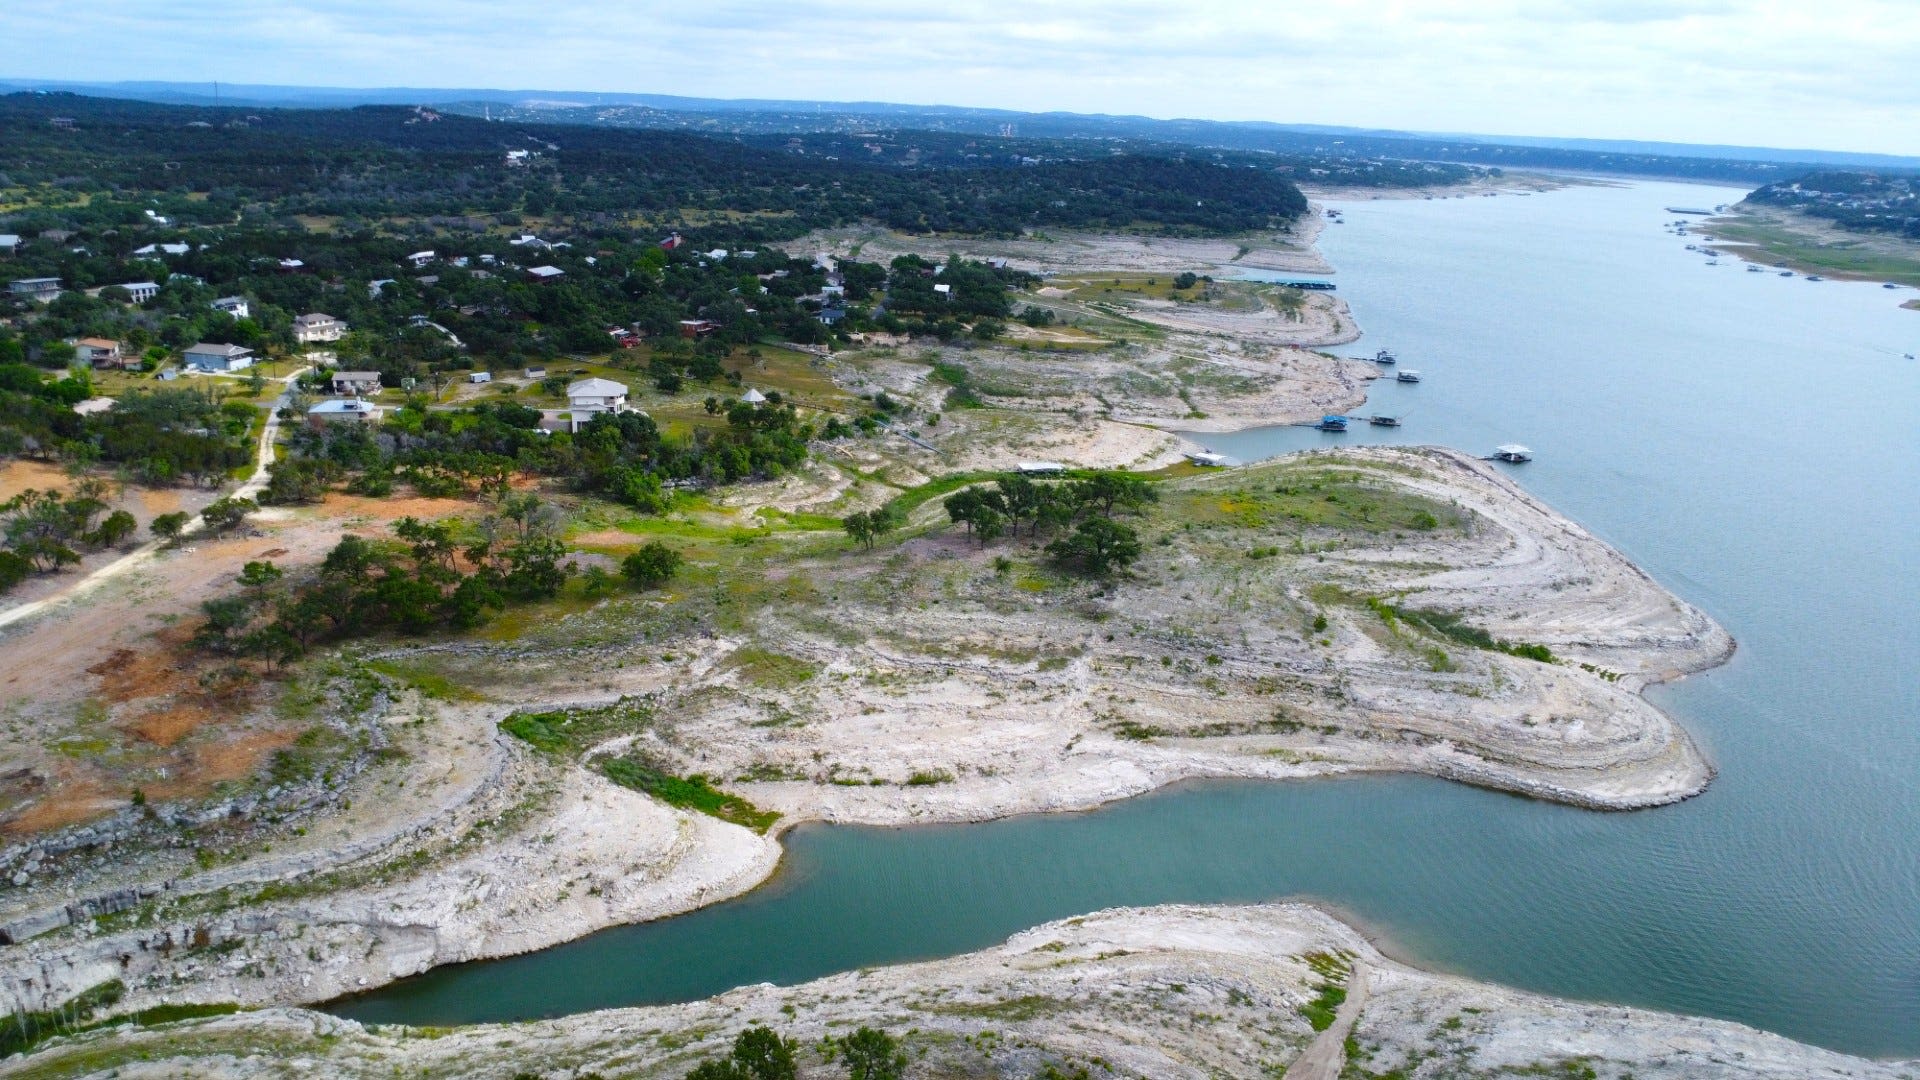 New Travis Club course at Lake Travis aims to produce great memories, not just great golf